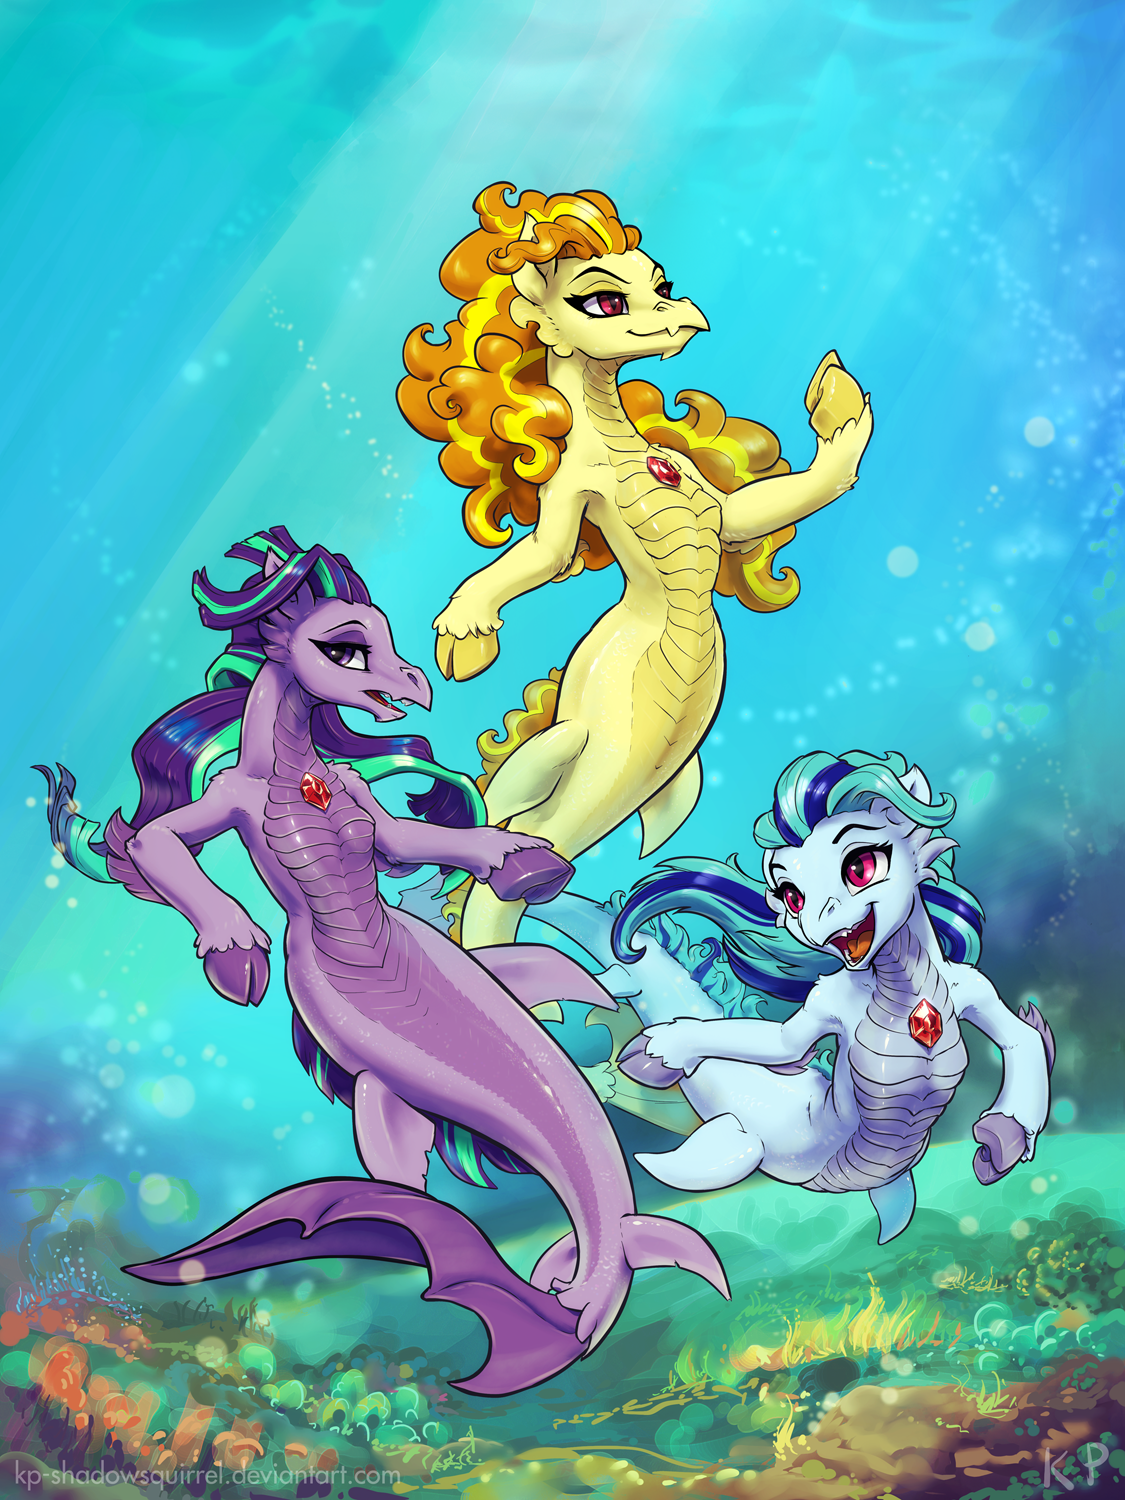 The Sirens!